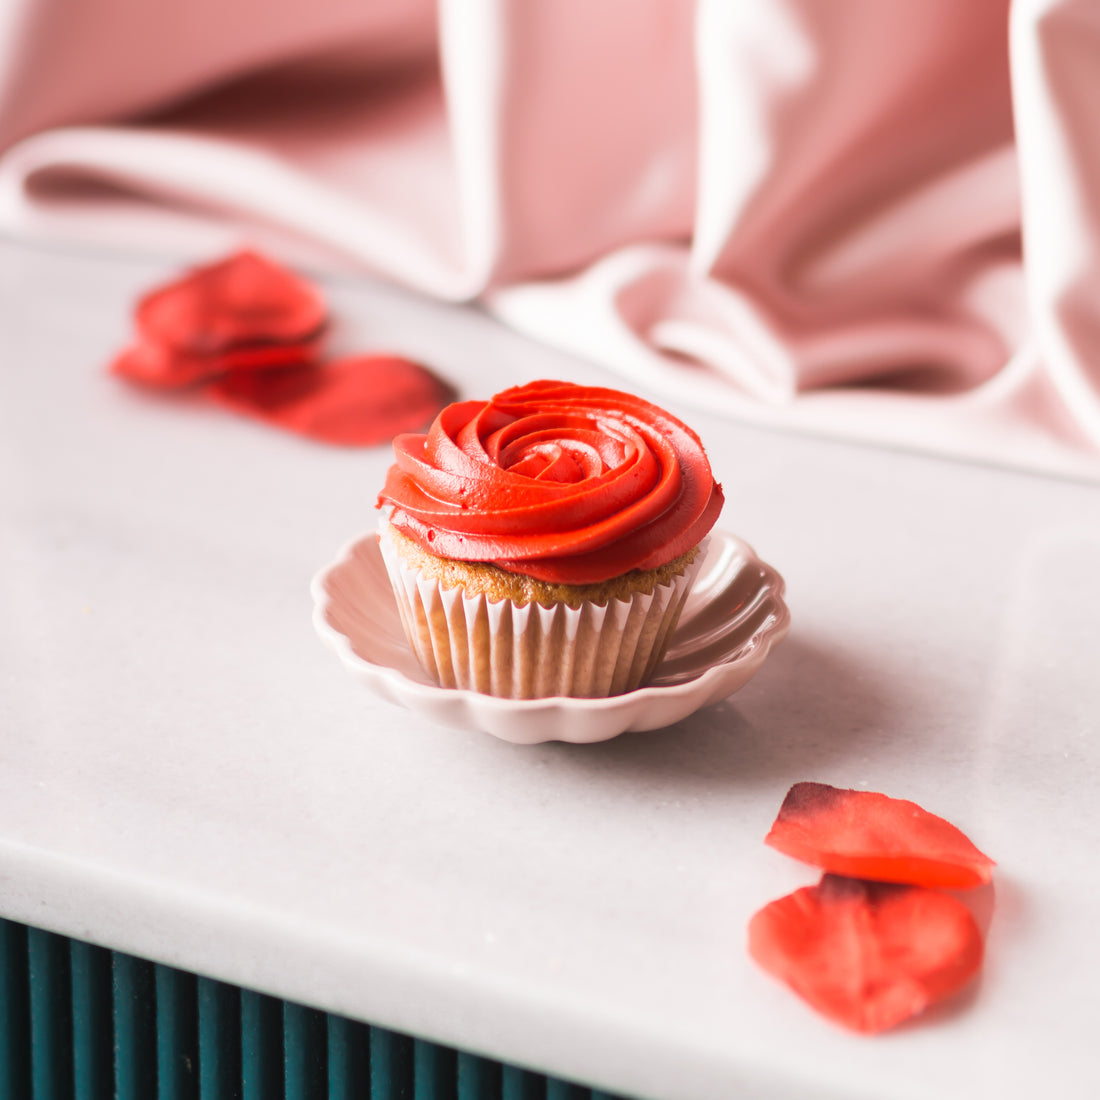 Indulge in a delicate and flavorful vanilla rose cupcake, with its subtle and fragrant taste and a swirl of creamy frosting. Pair it perfectly with a crisp and refreshing Brut Cava, with its subtle fruit notes that complement the cupcake&